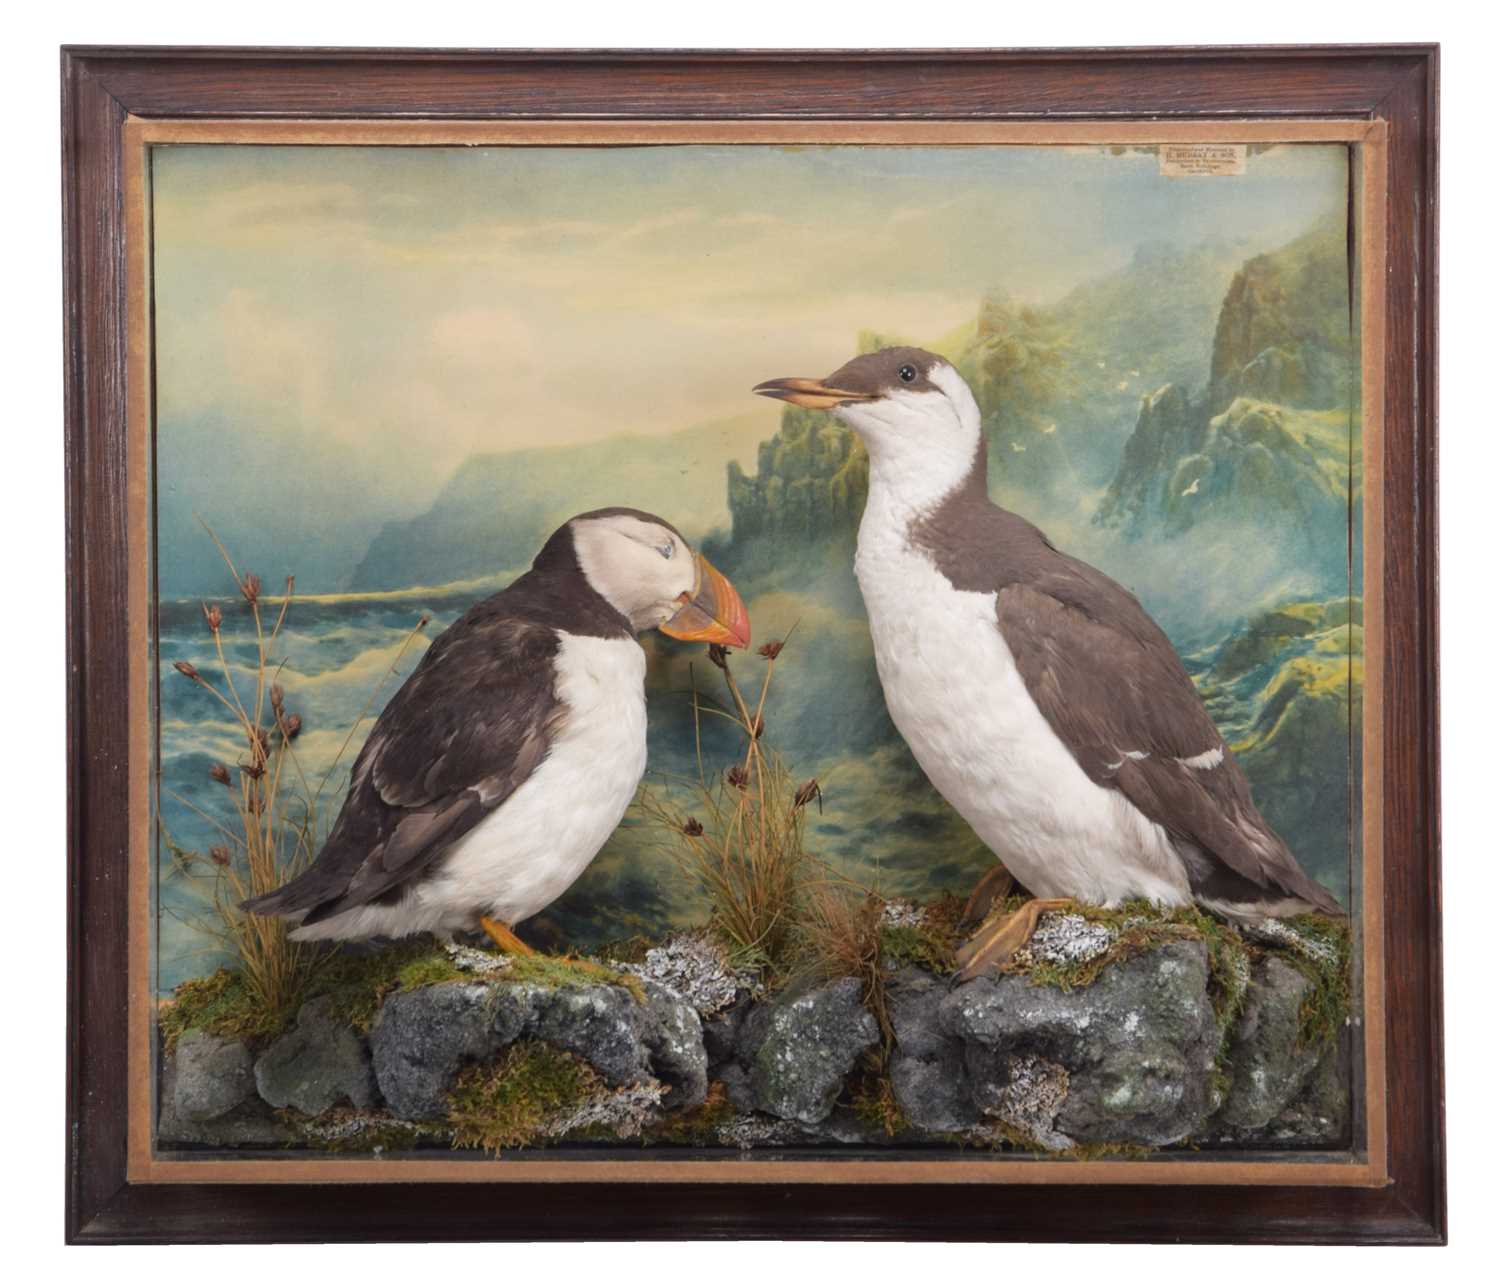 Taxidermy: Cased Puffin & Guillemot (Fratercula arctica/Uria aalge) circa early 20th century, by